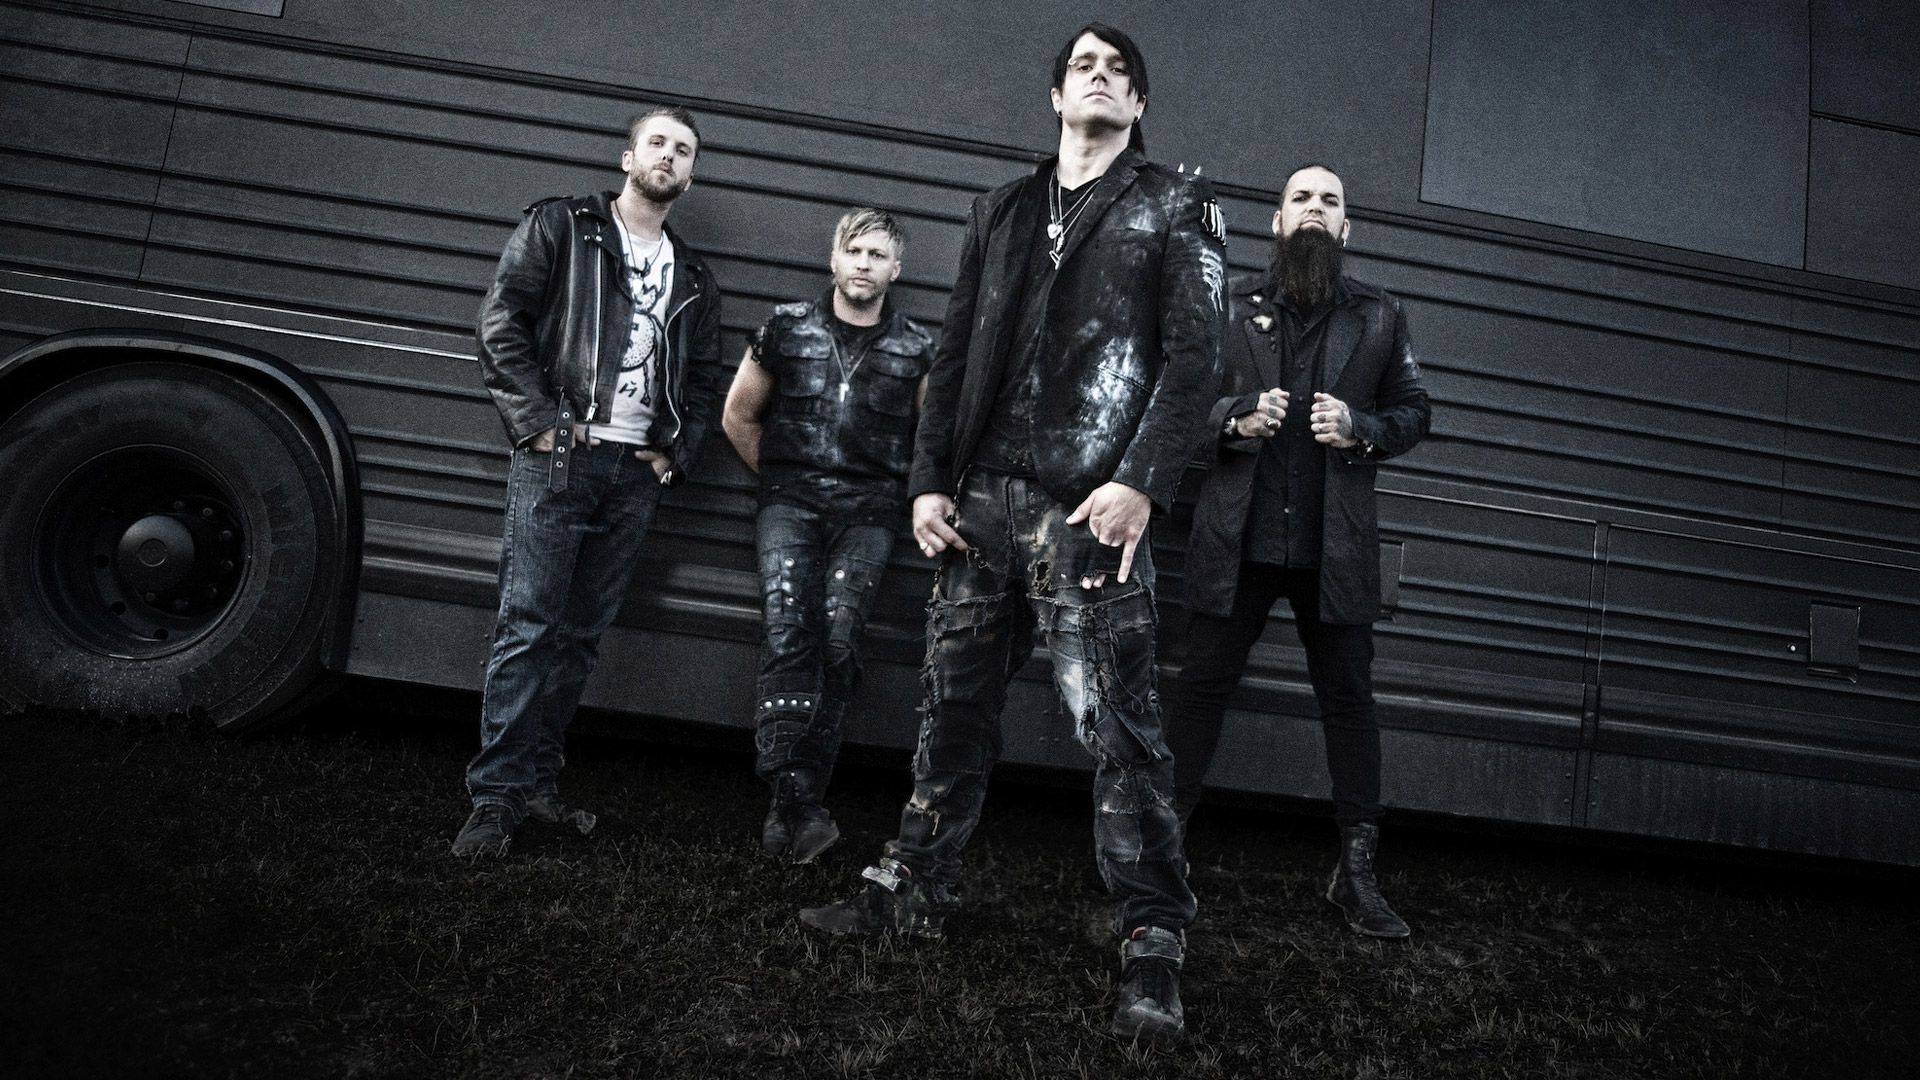 Three Days Grace Wallpapers - Top Free Three Days Grace Backgrounds 1920x1080